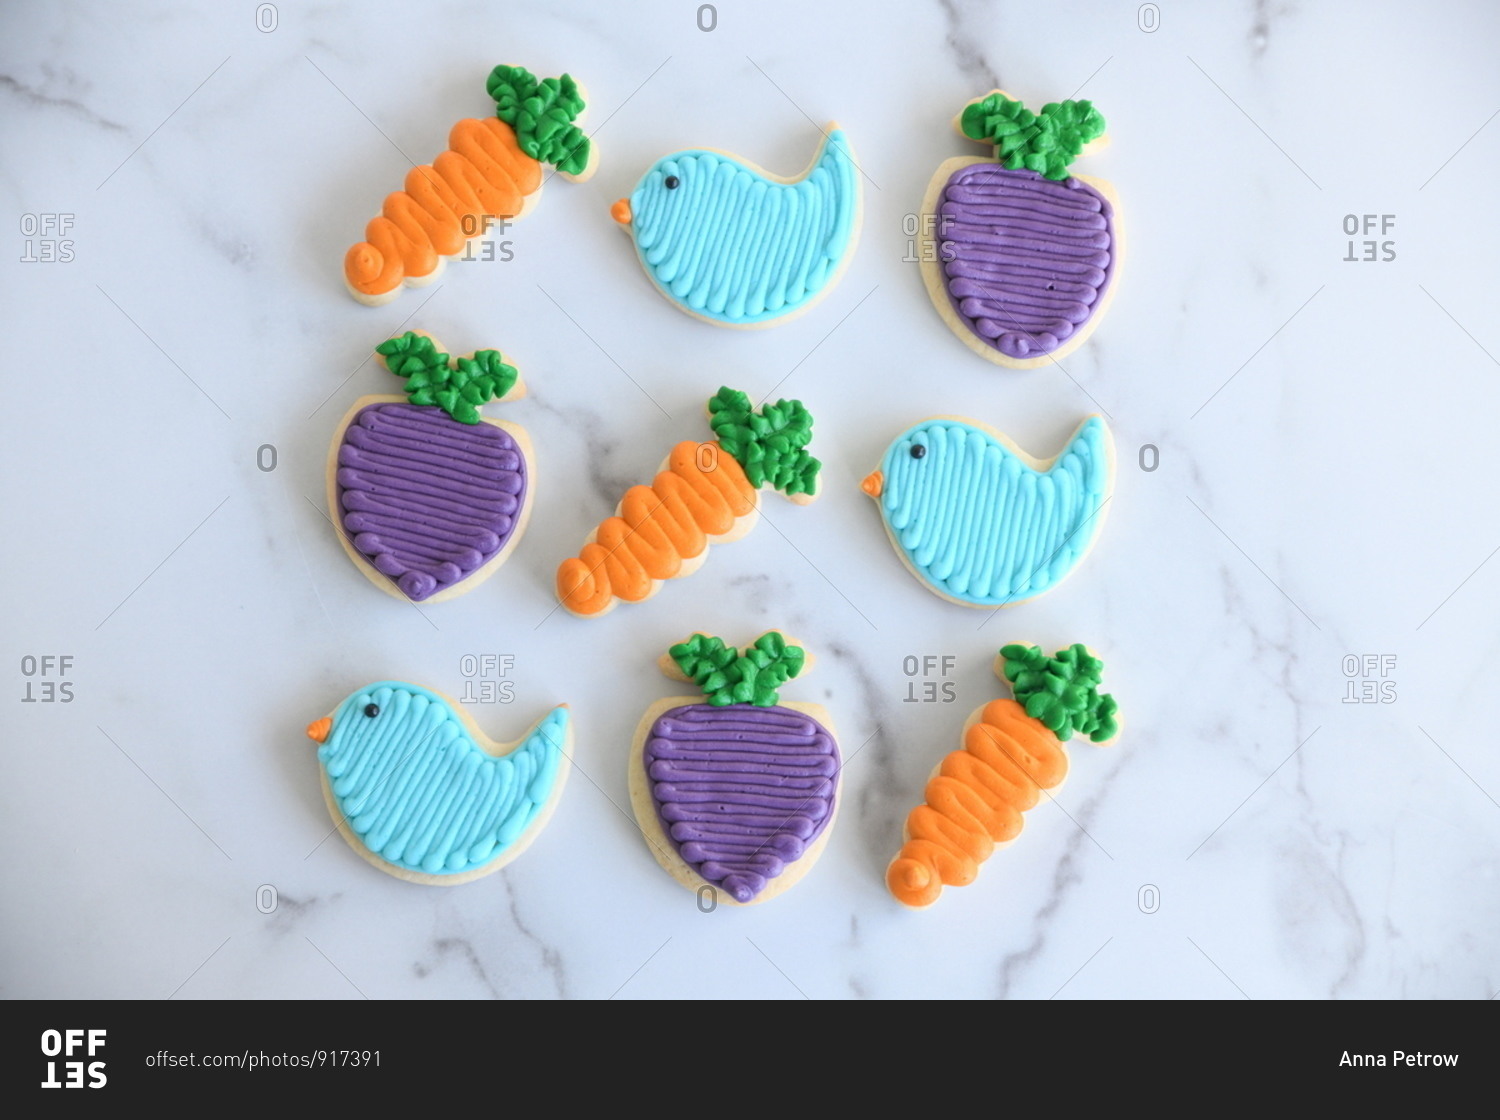 Overhead view of colorful bird, carrot and turnip Easter cookies on marble surface